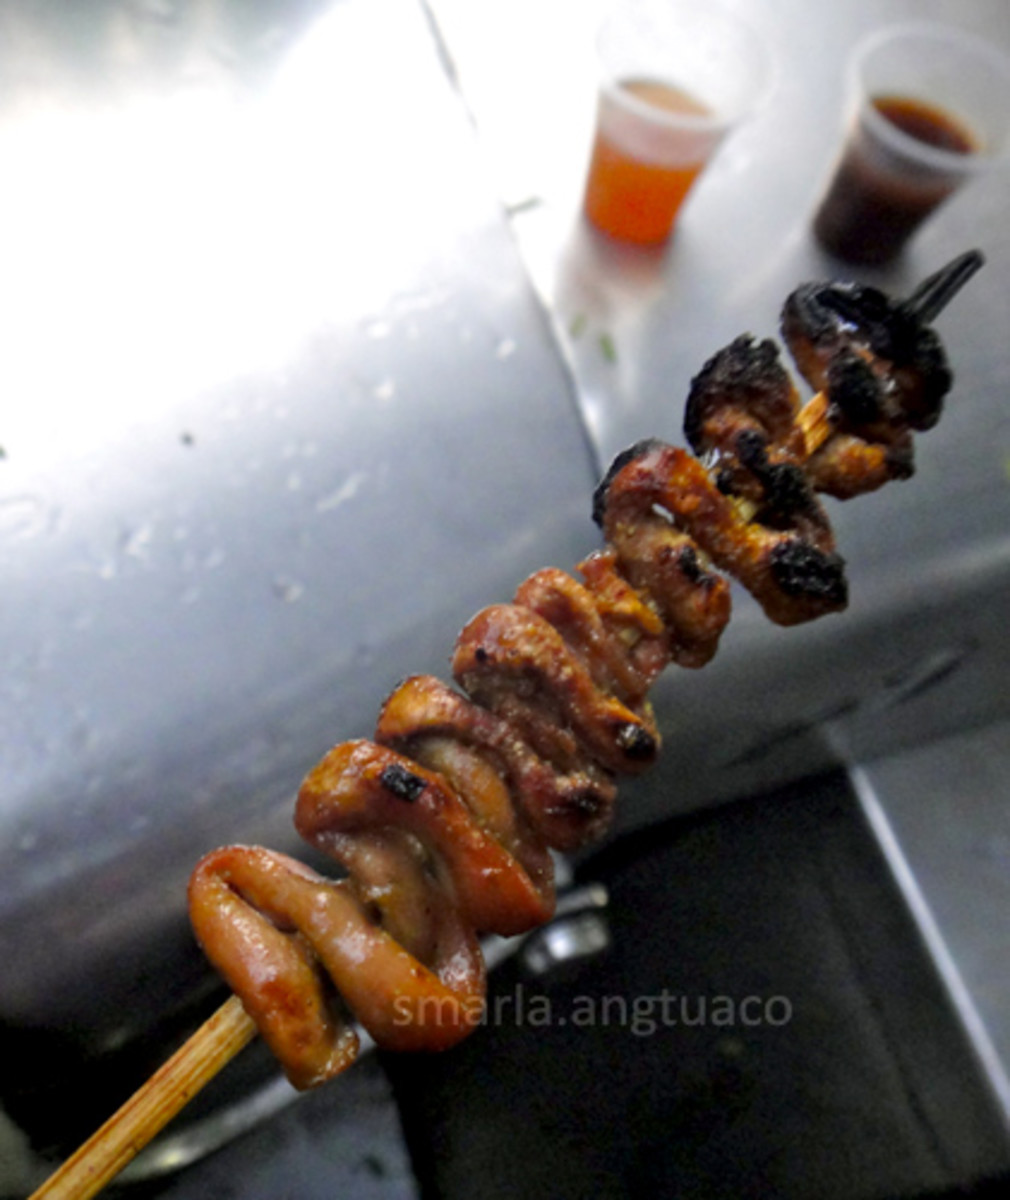 skewered meat "isaw" (a Flipino street food)